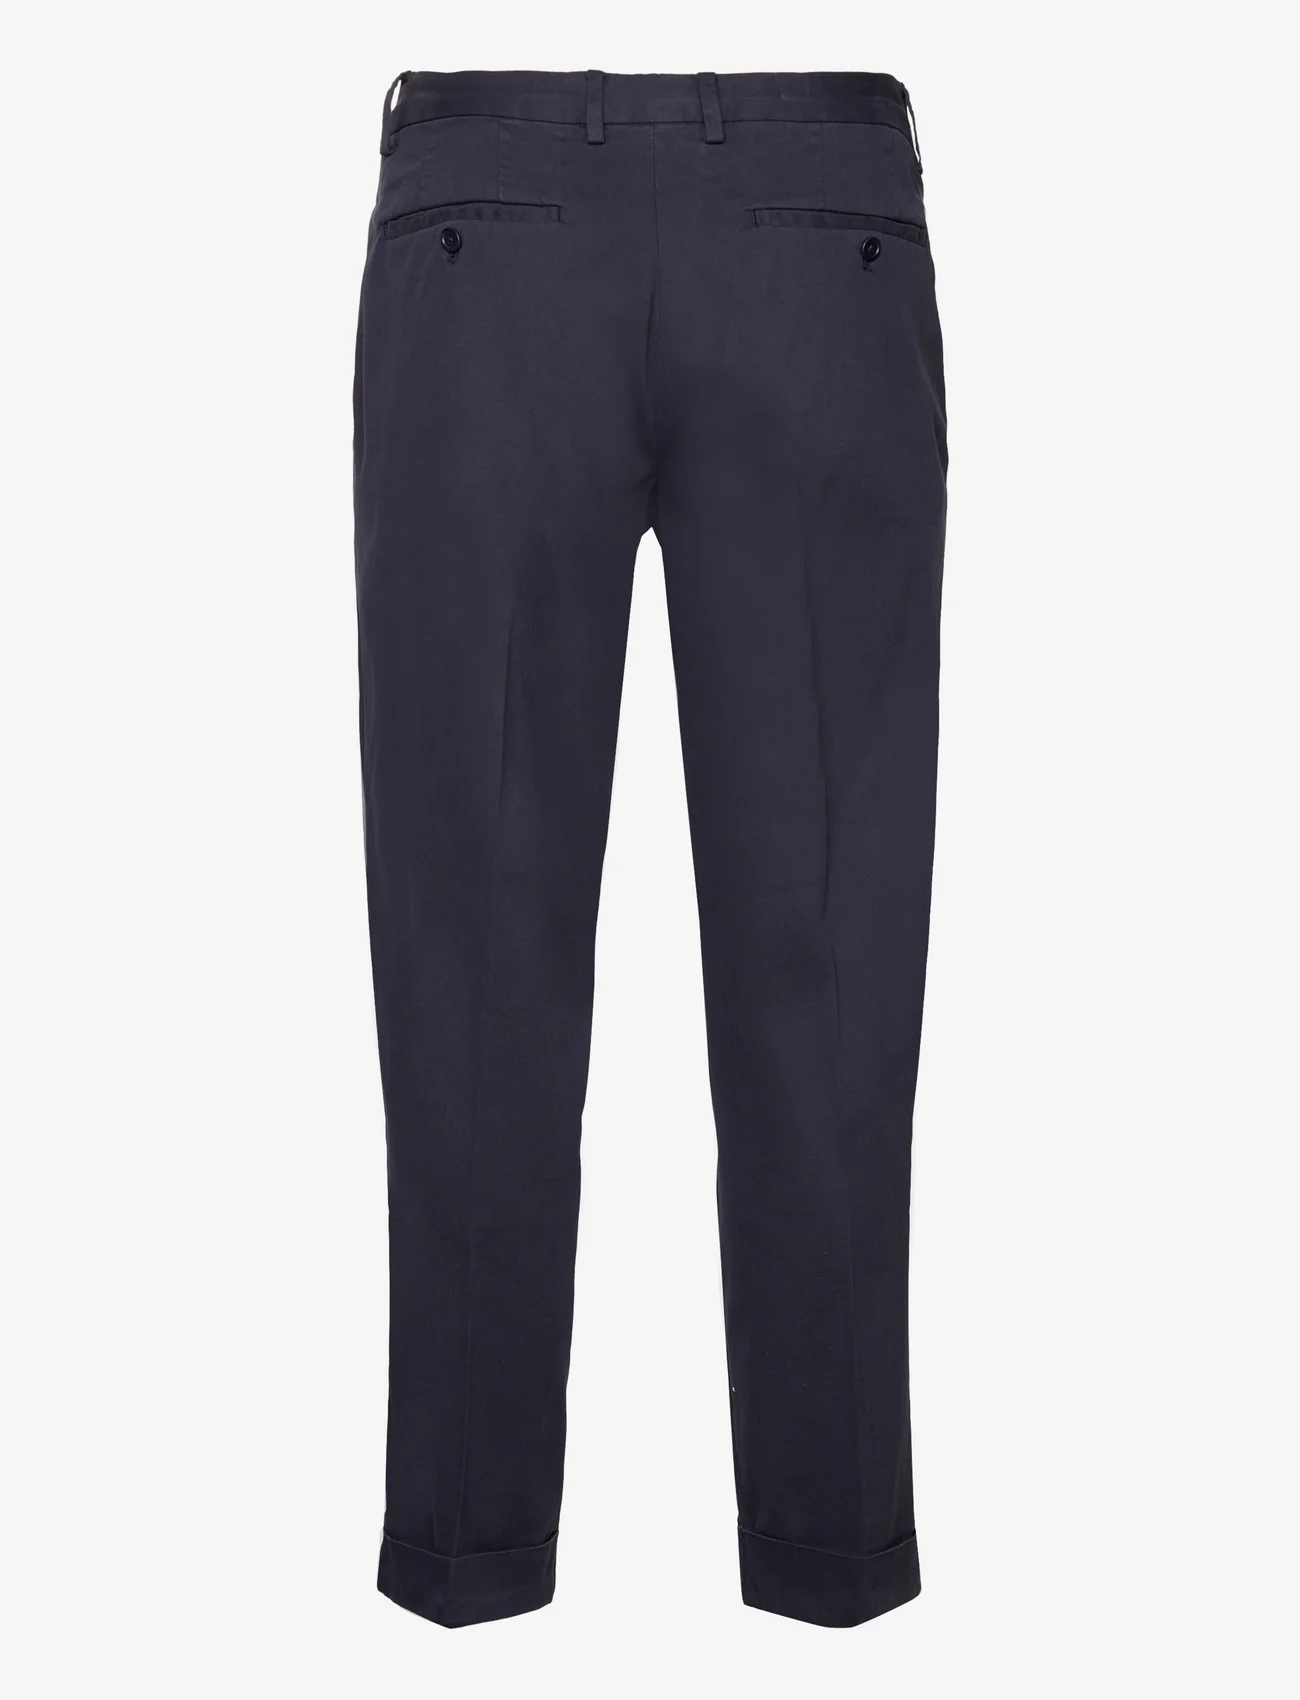 GANT - RELAXED TAPERED COTTON SUIT PANTS - chinos - evening blue - 1